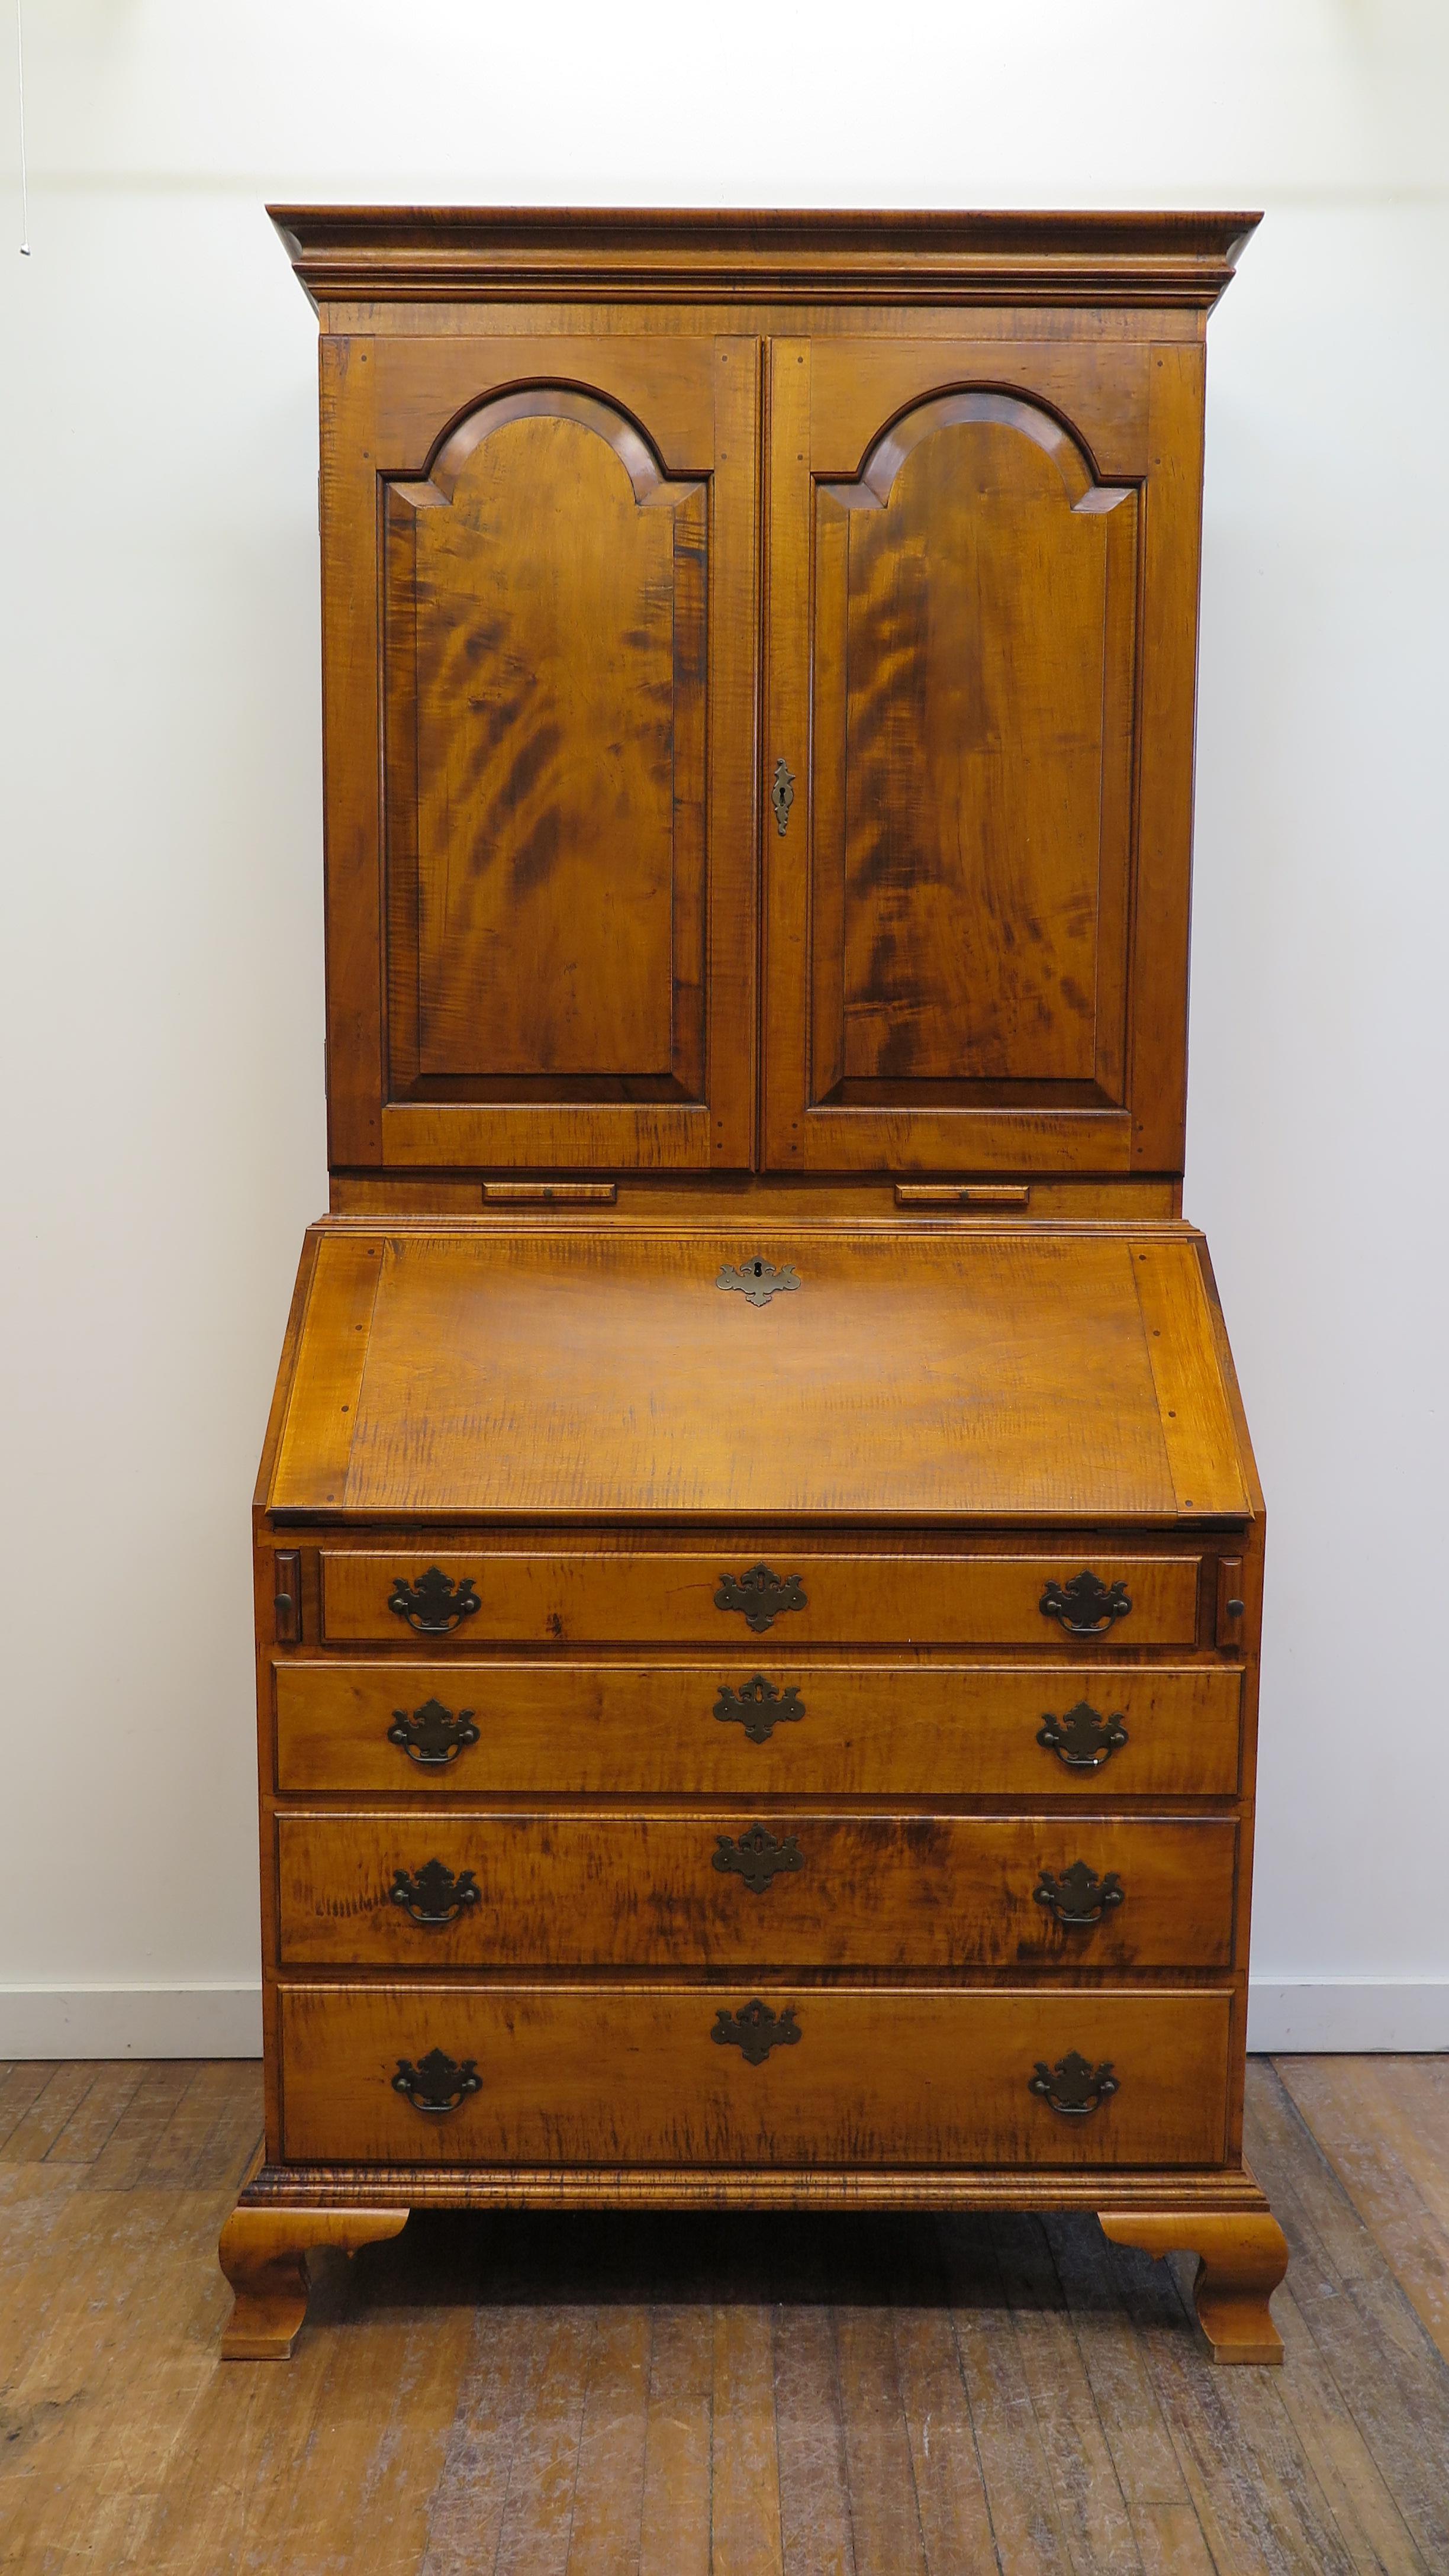 Mid century tiger maple secretary hand made by renowned cabinet maker Kurt Richeburg Hanover MA. Signed on back LeFort - Kurt Richenburg Hanover MA. A Chippendale Style Tiger Maple Secretary of the high quality finely crafted by master cabinetmaker.